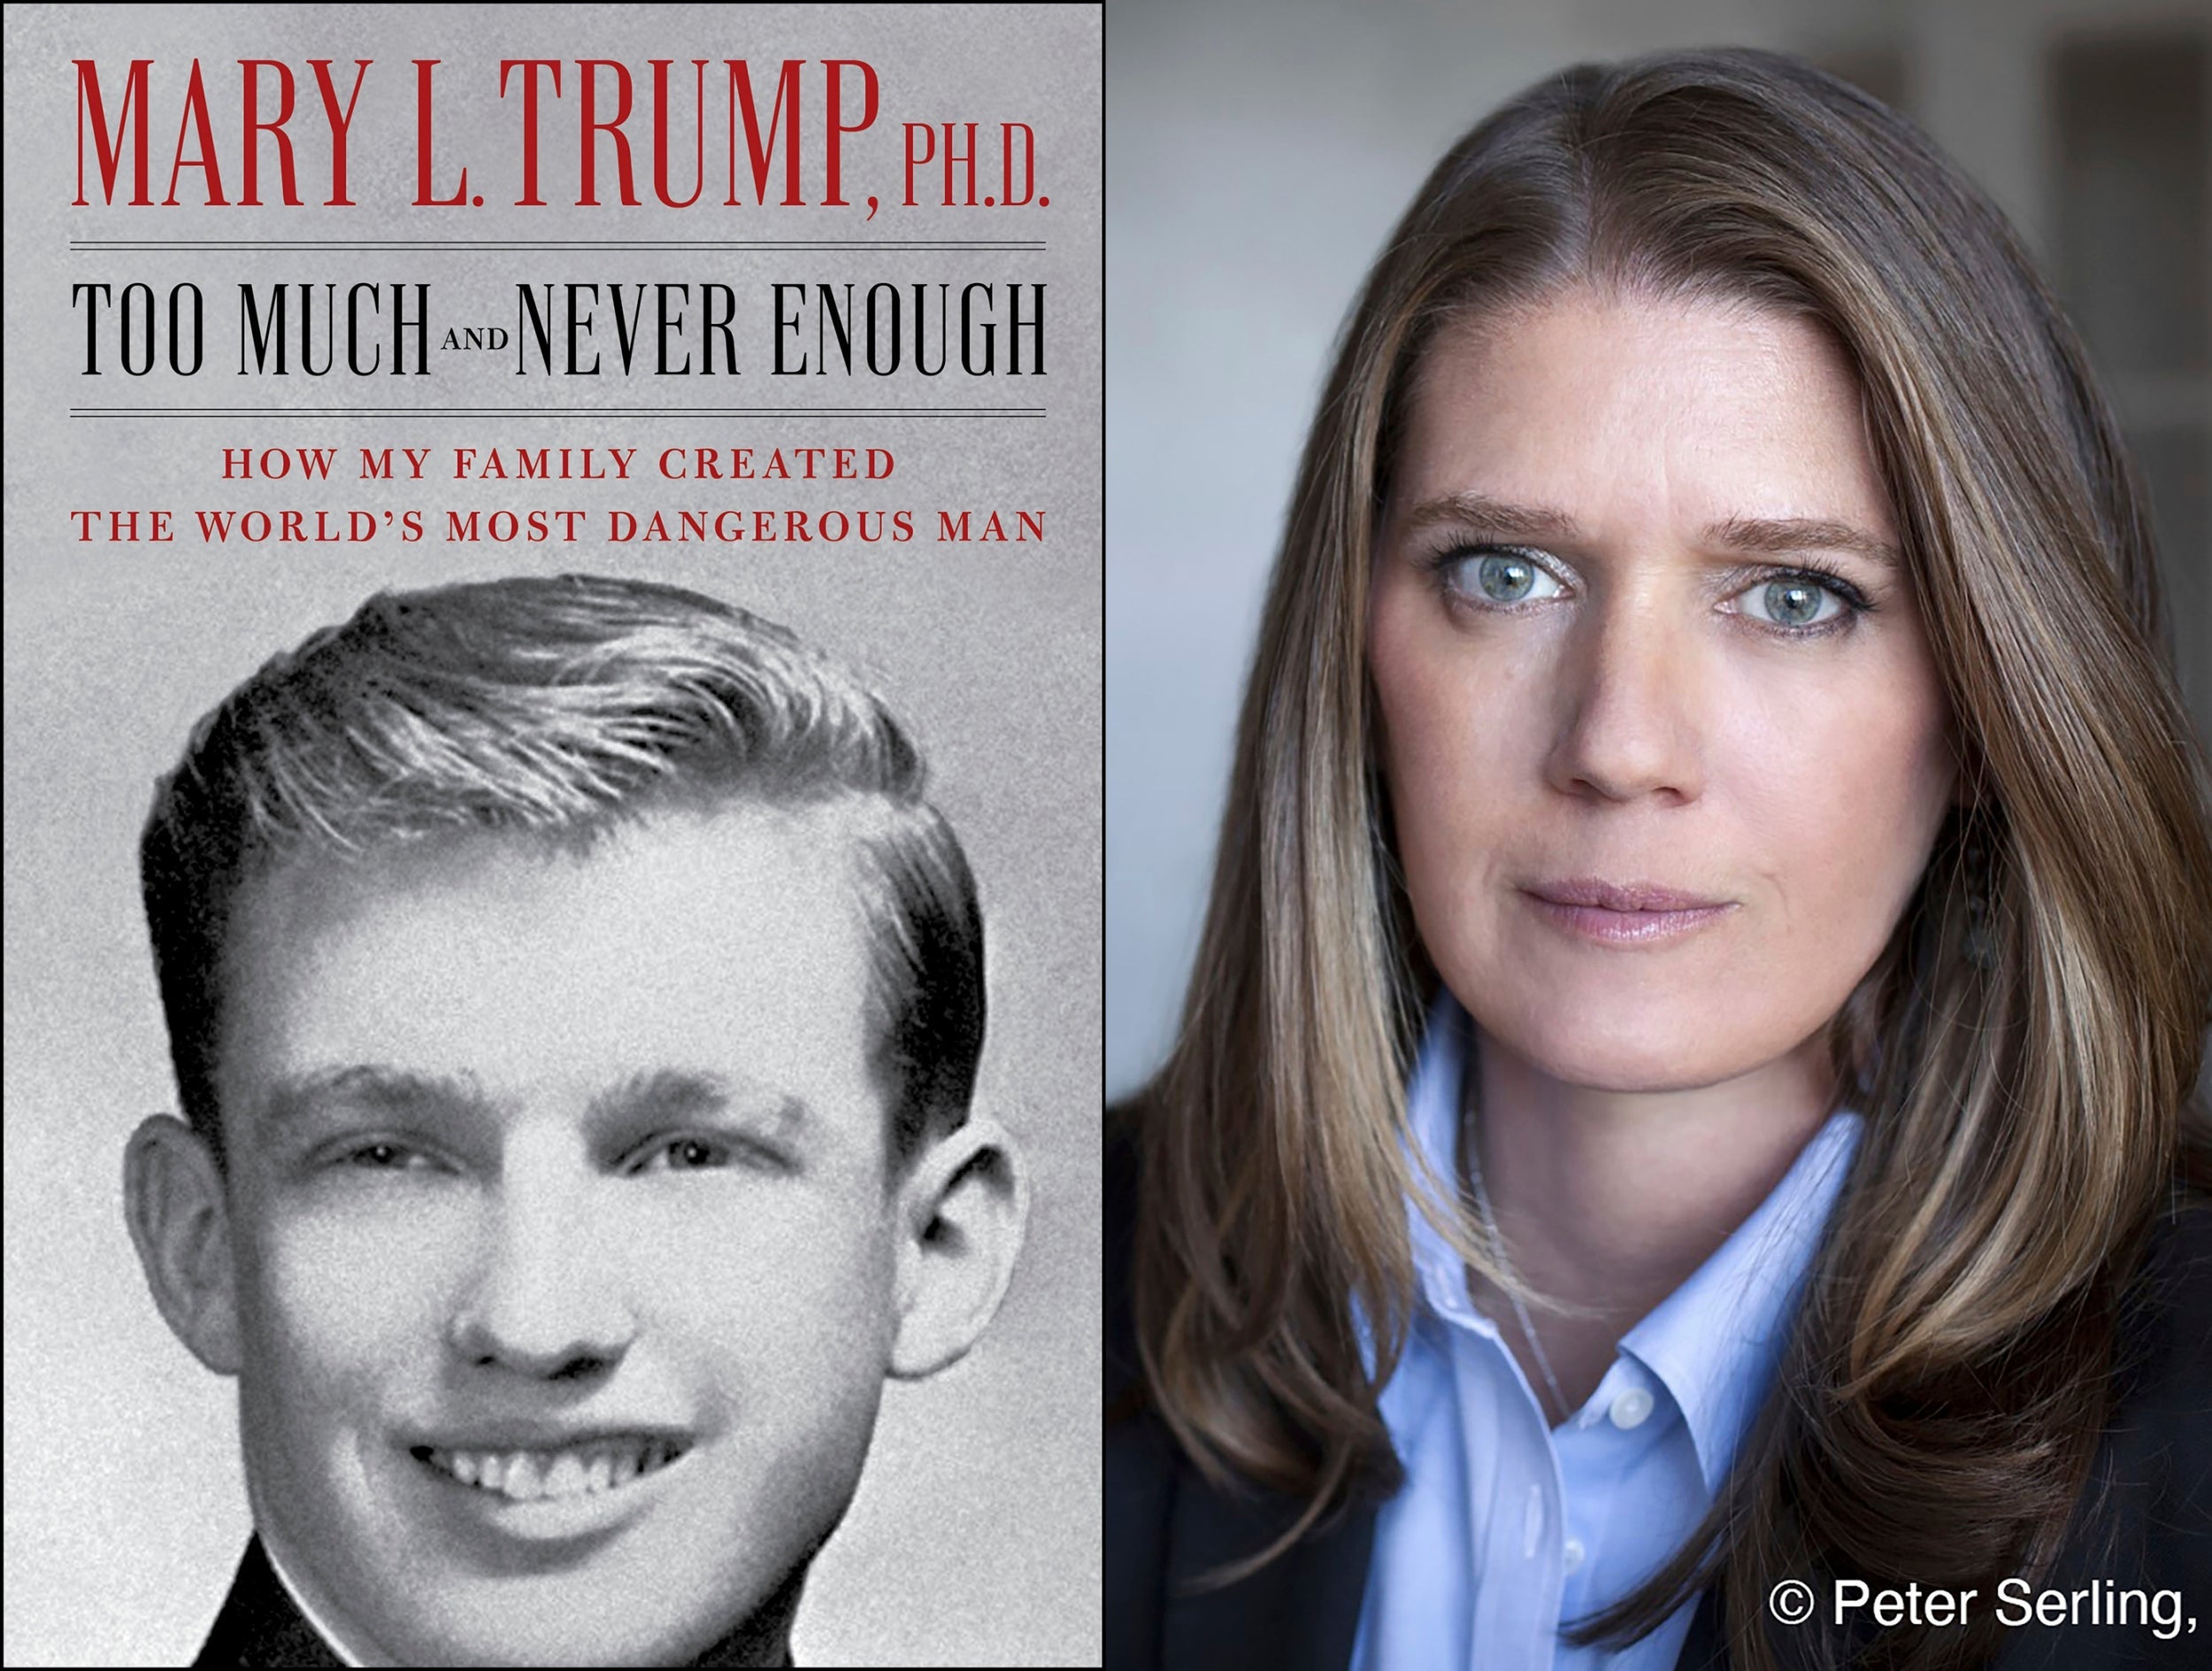 Mary Trump wrote her book for noble reasons, but I couldn't help but feel sorry for Donald's sister Maryanne